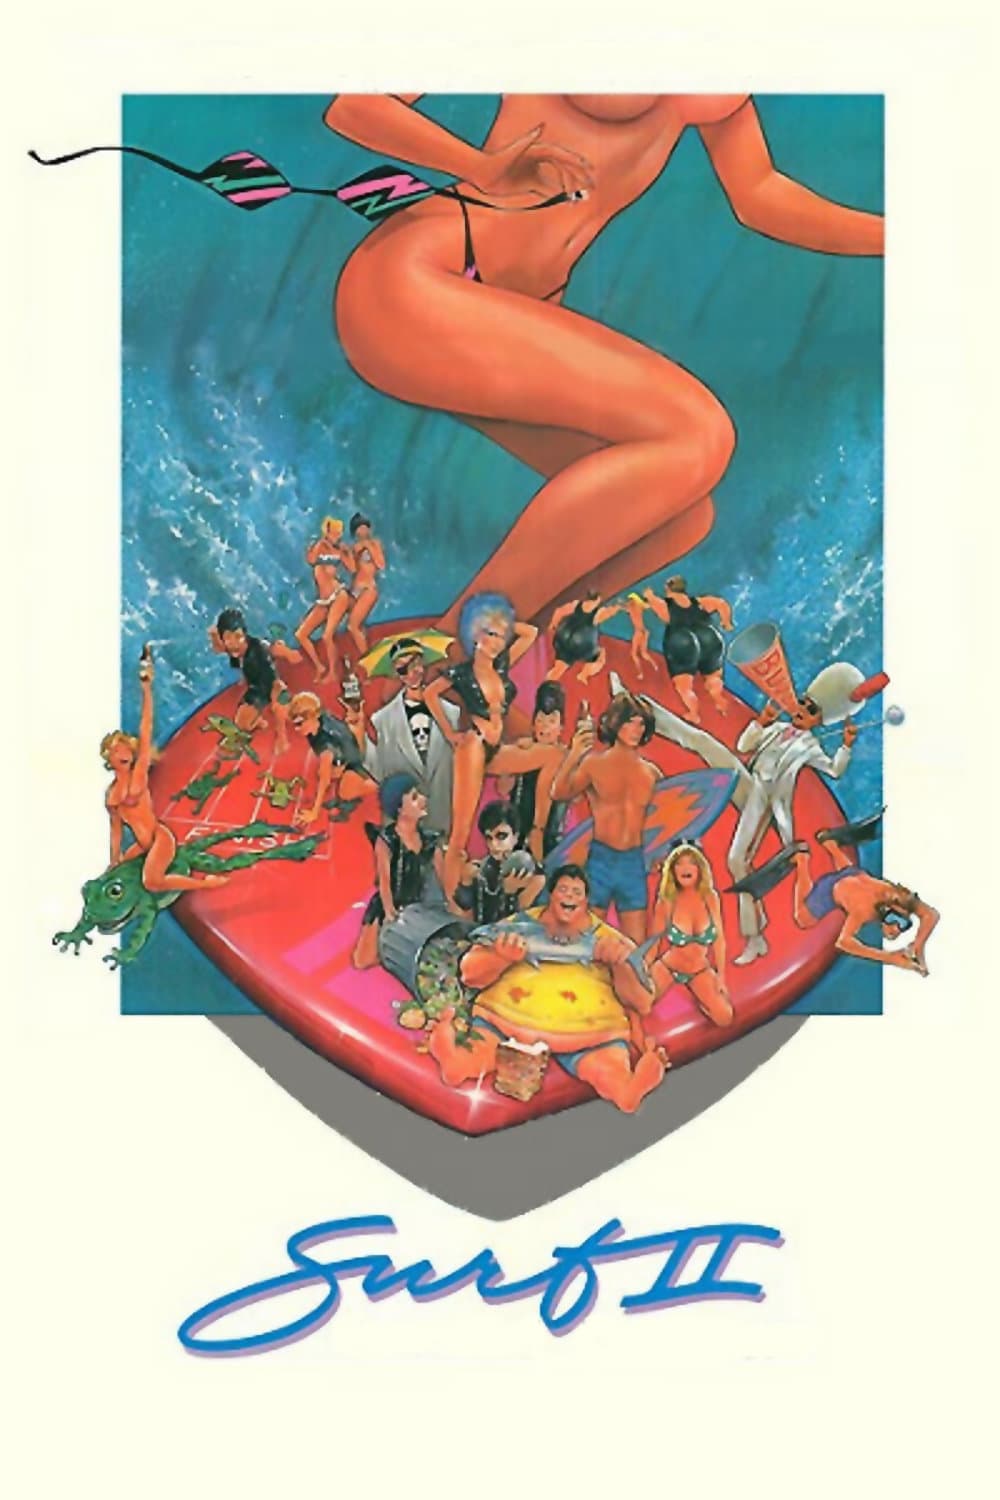 Surf II: The End of the Trilogy (1984)